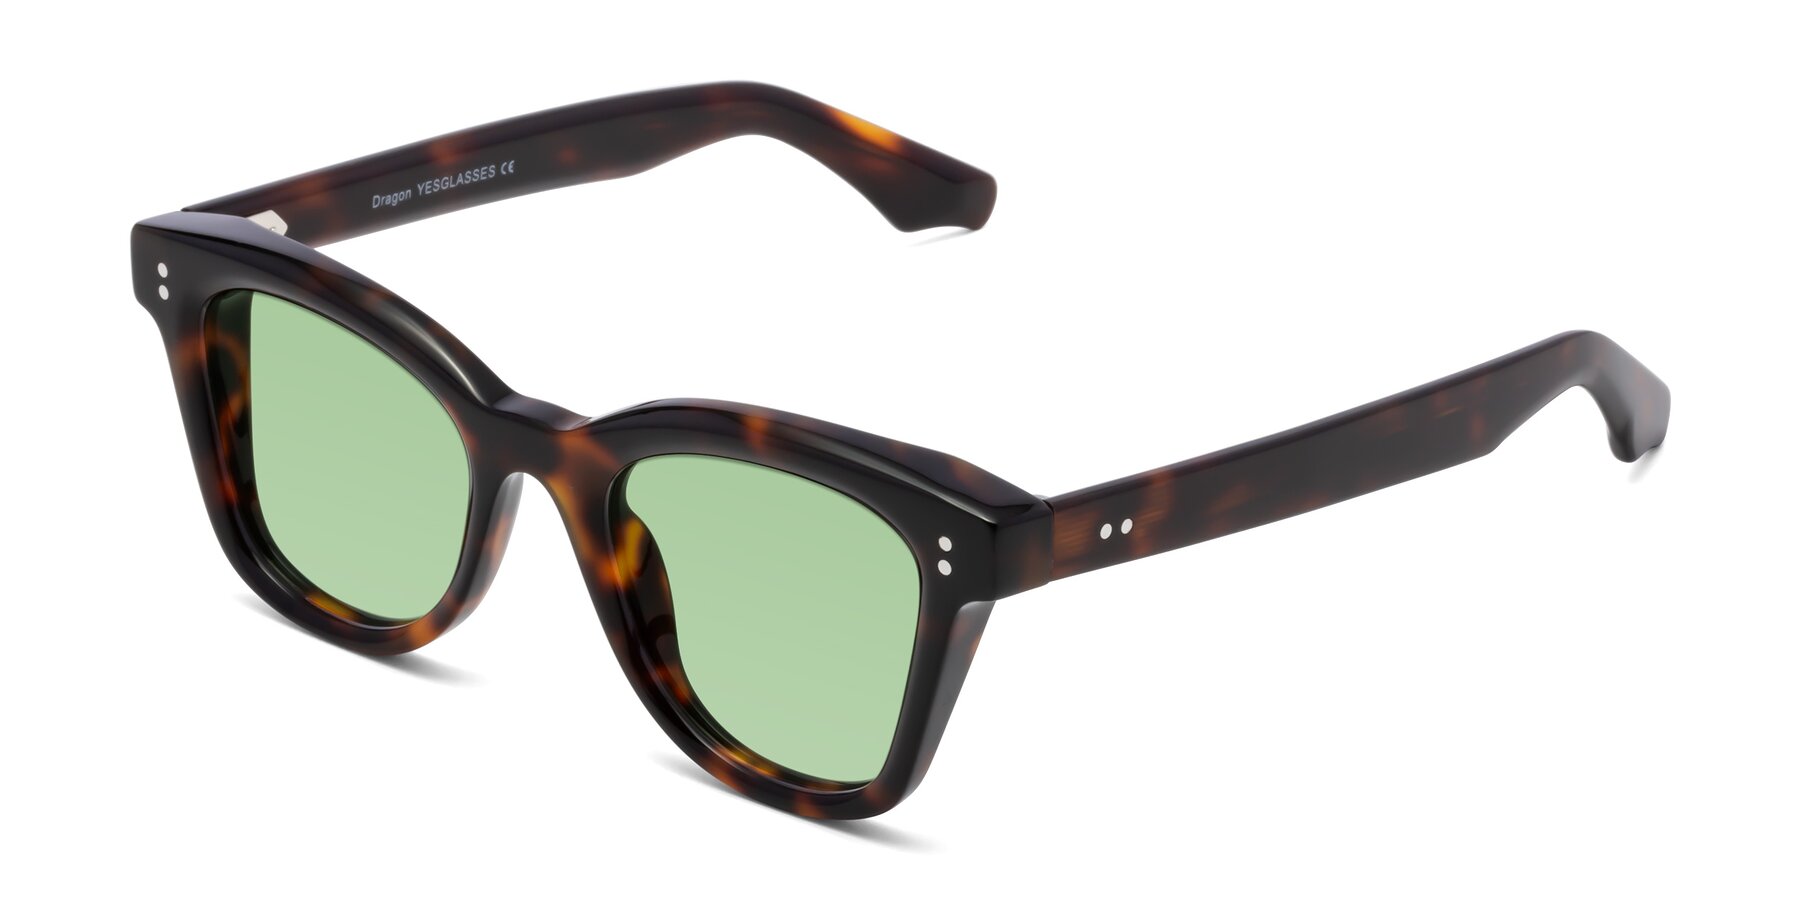 Angle of Dragon in Tortoise with Medium Green Tinted Lenses